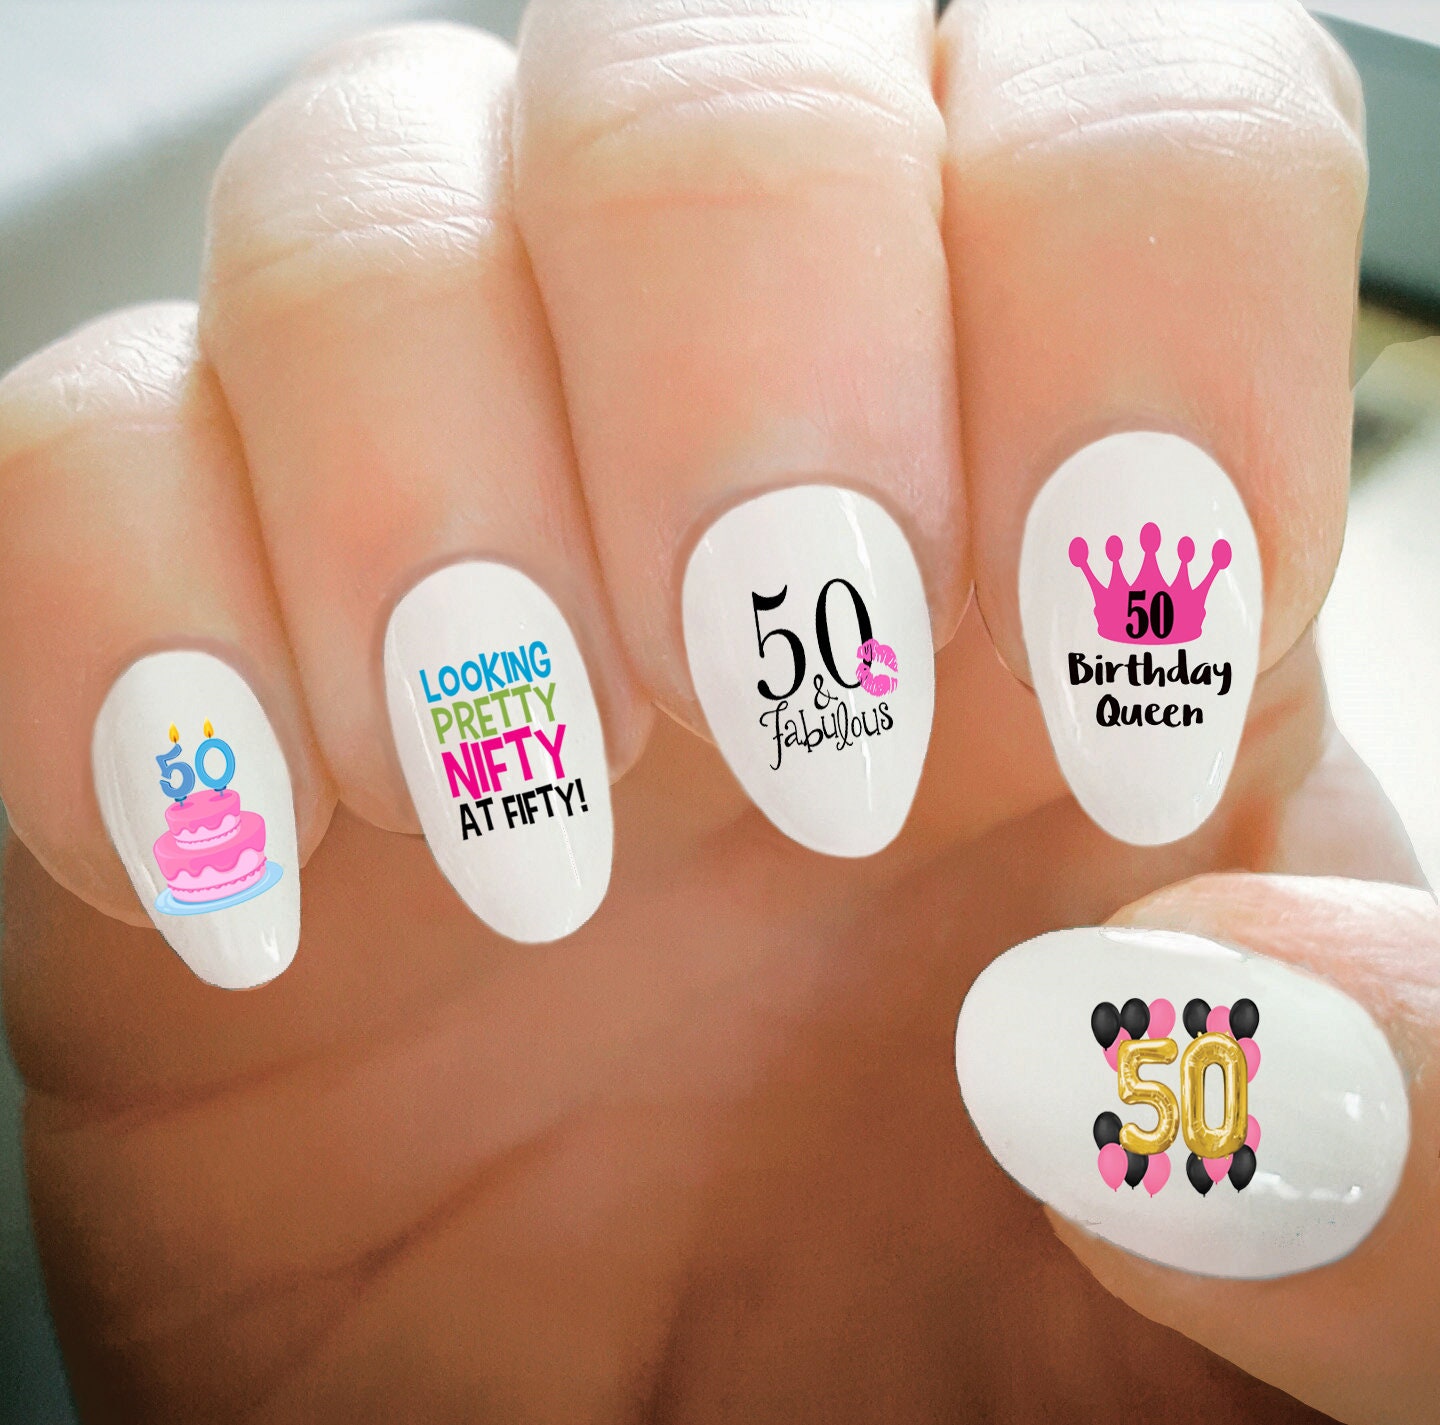 50 Super pretty nail art designs – Dying over these nails! 34